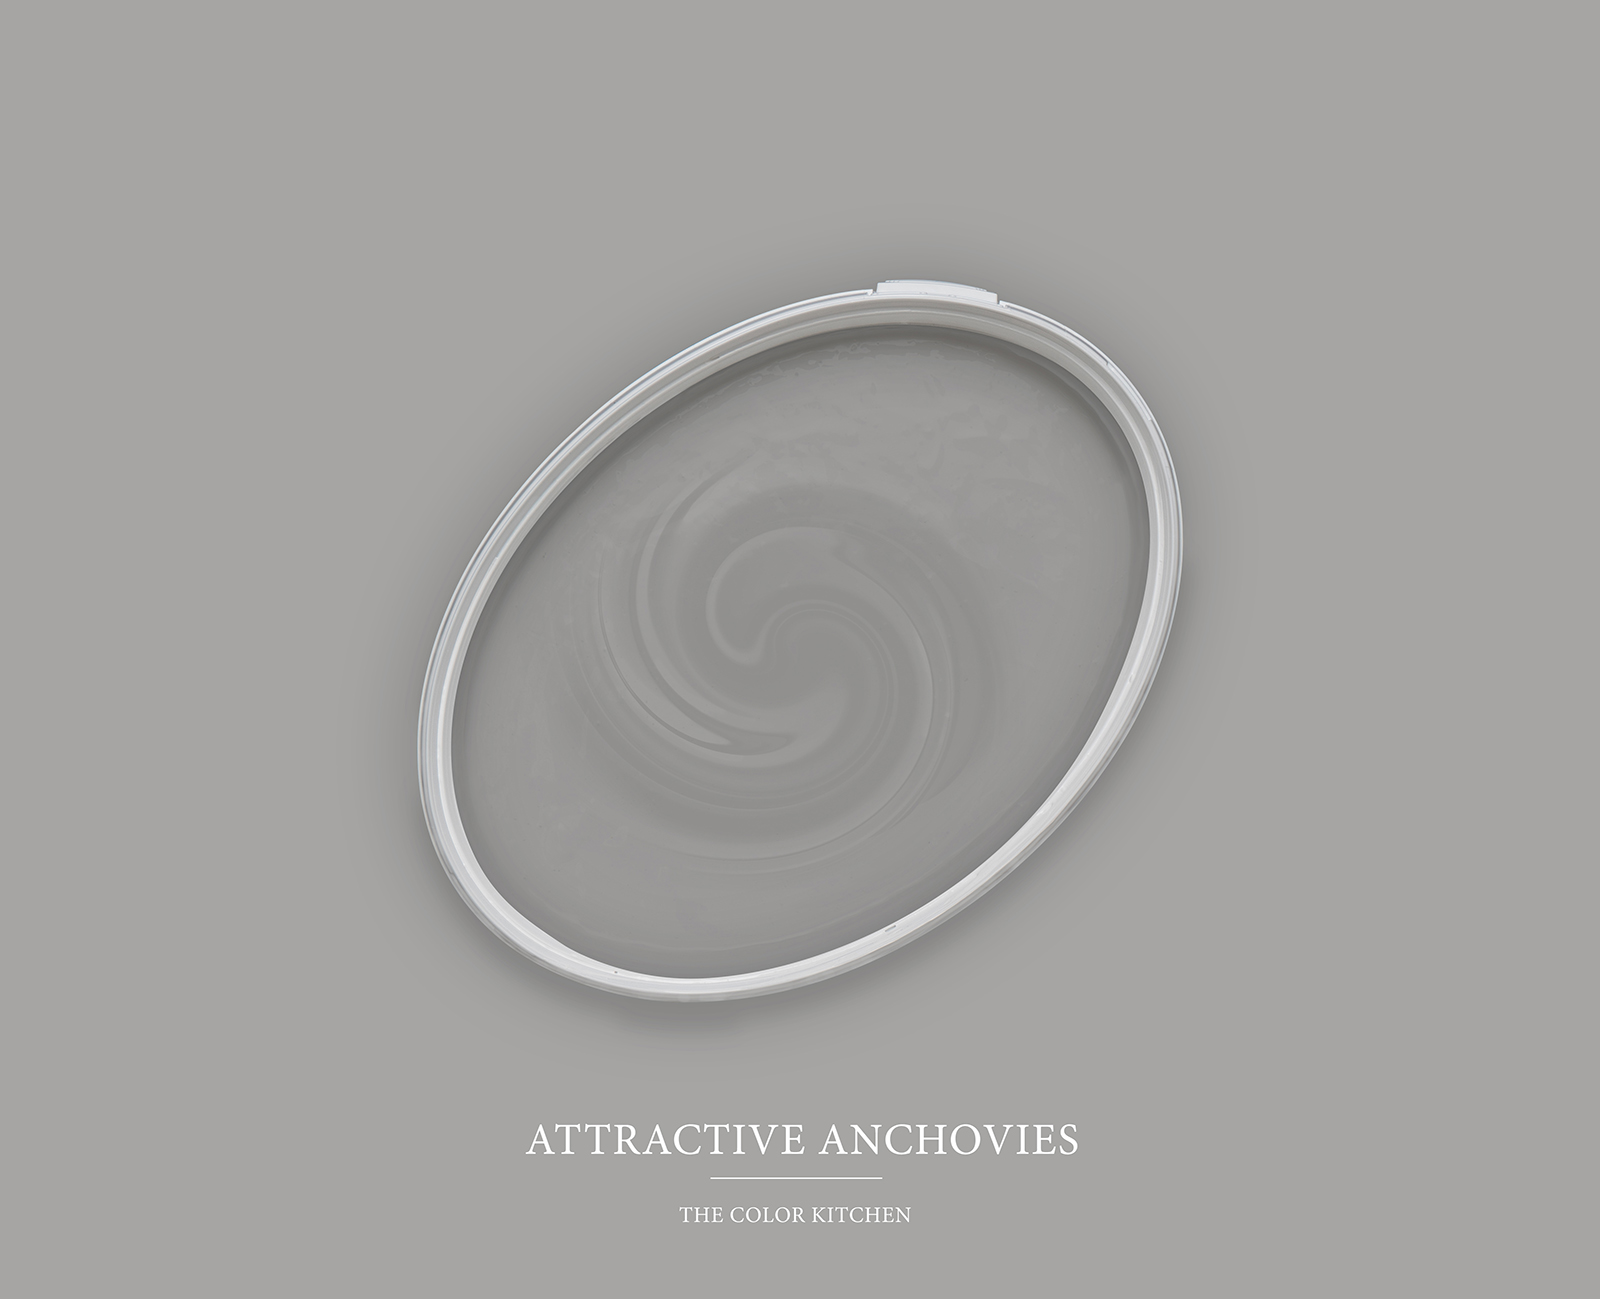         Wall Paint TCK1011 »Attractive Anchovies« in warm silver-grey – 2.5 litre
    